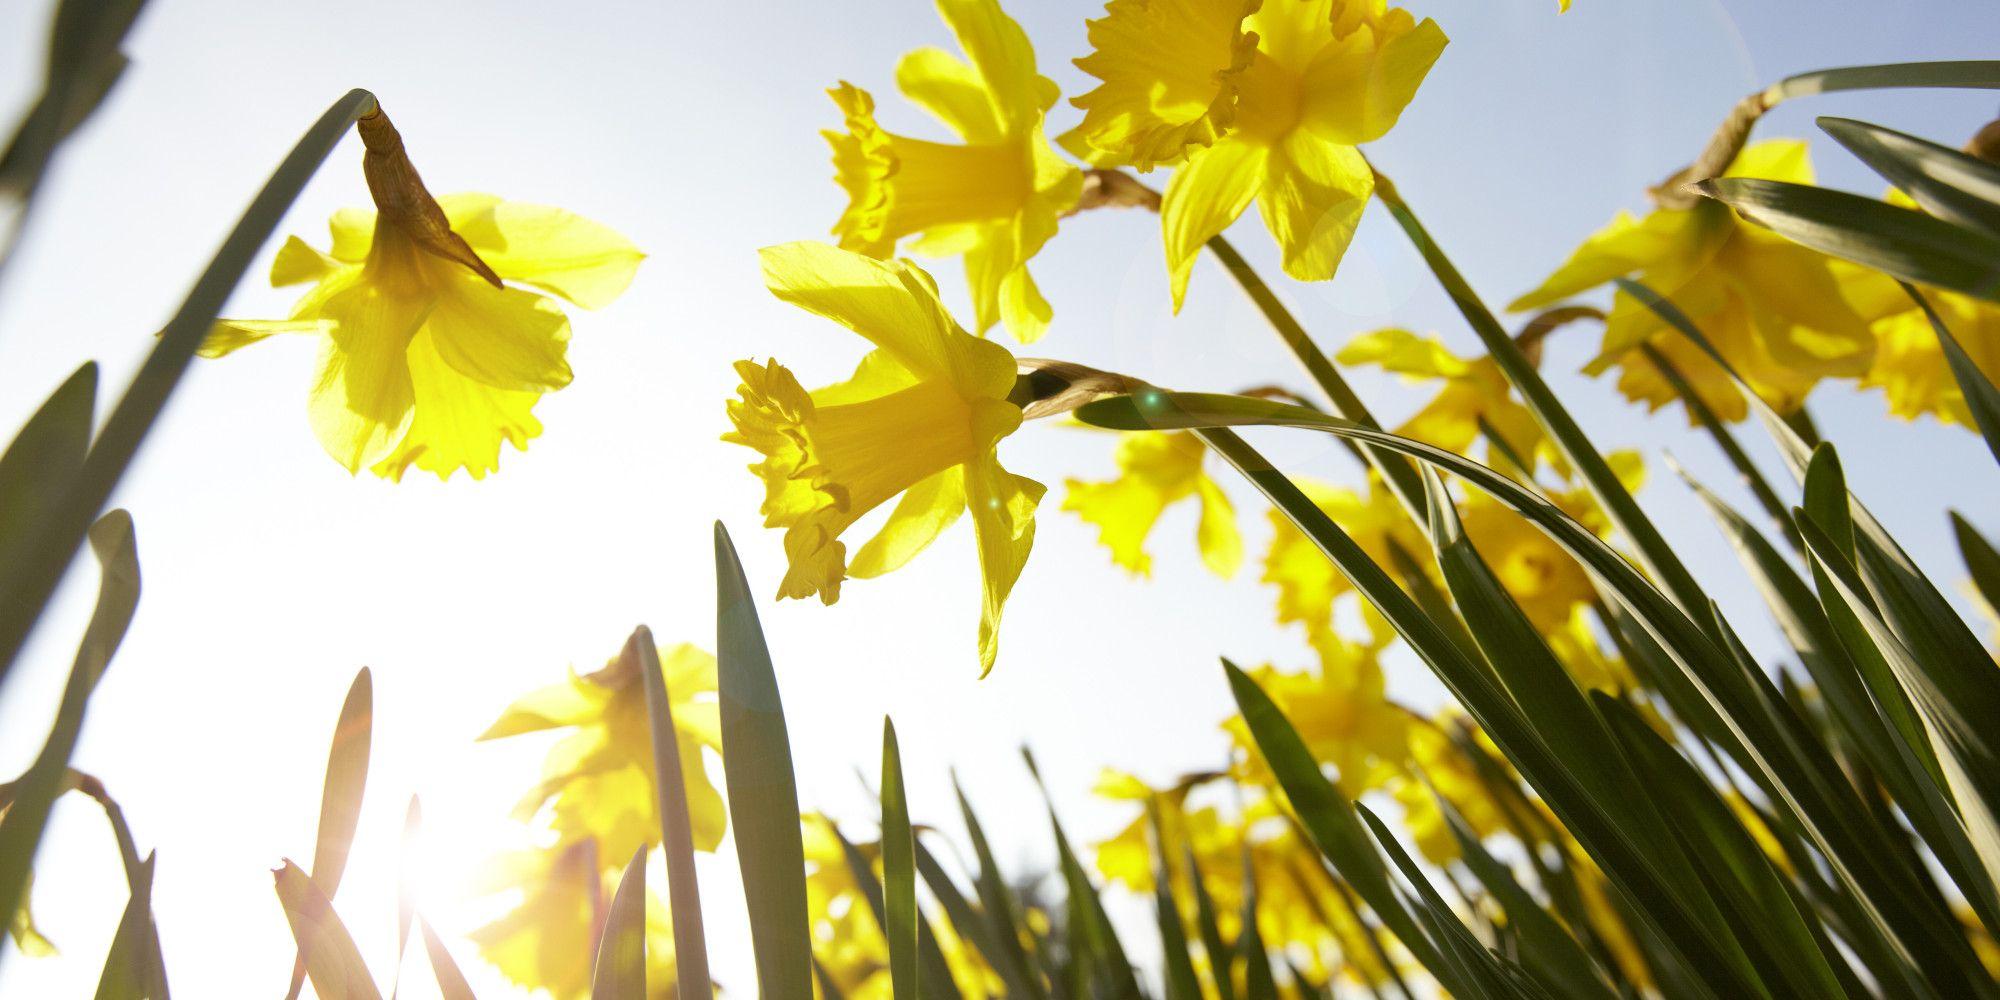 First Day Of Spring 2014 Arrives On Thursday, March 20